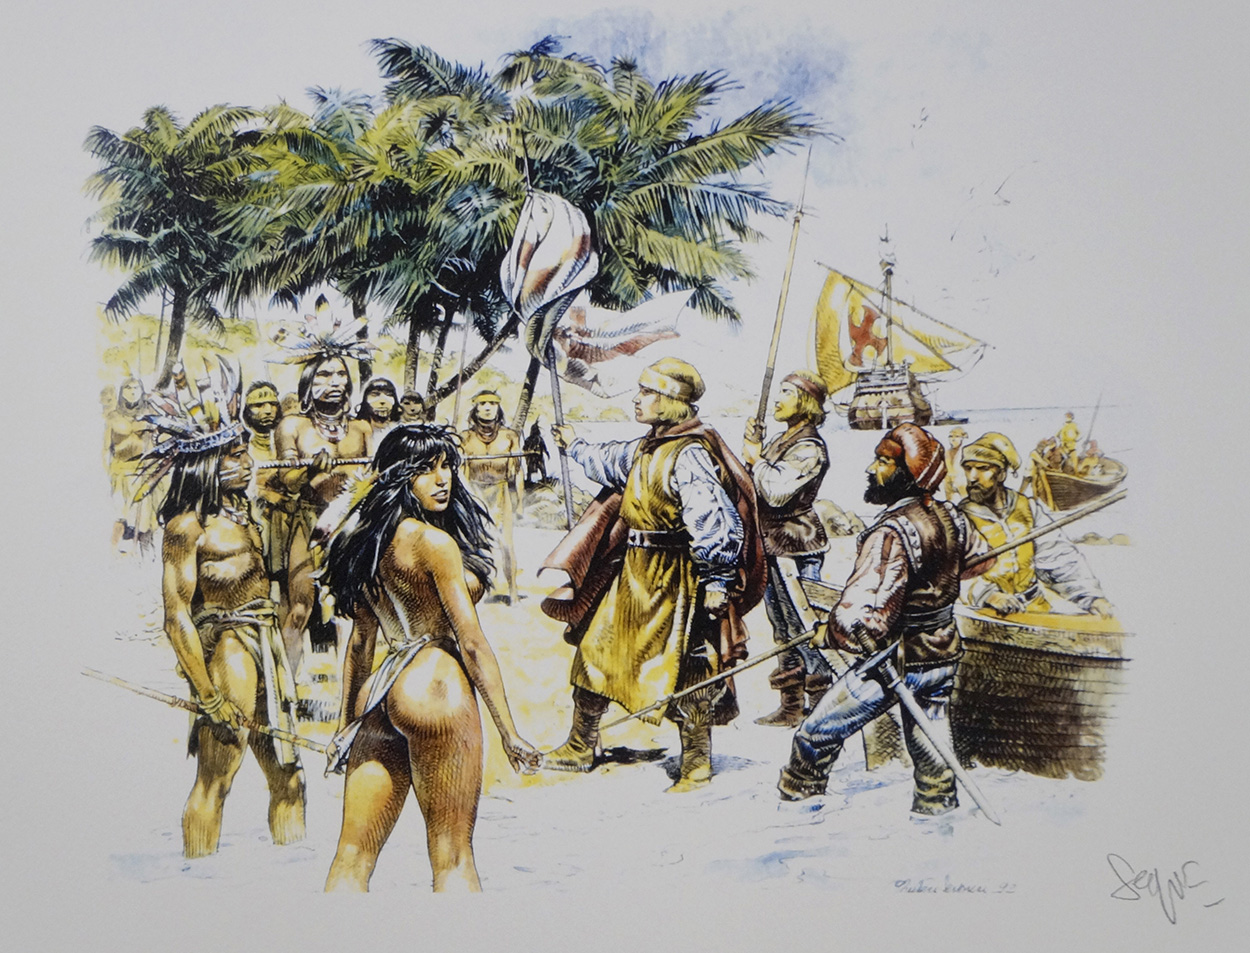 Natives and Invaders (Limited Edition Print) (Signed) art by Paolo Serpieri Art at The Illustration Art Gallery